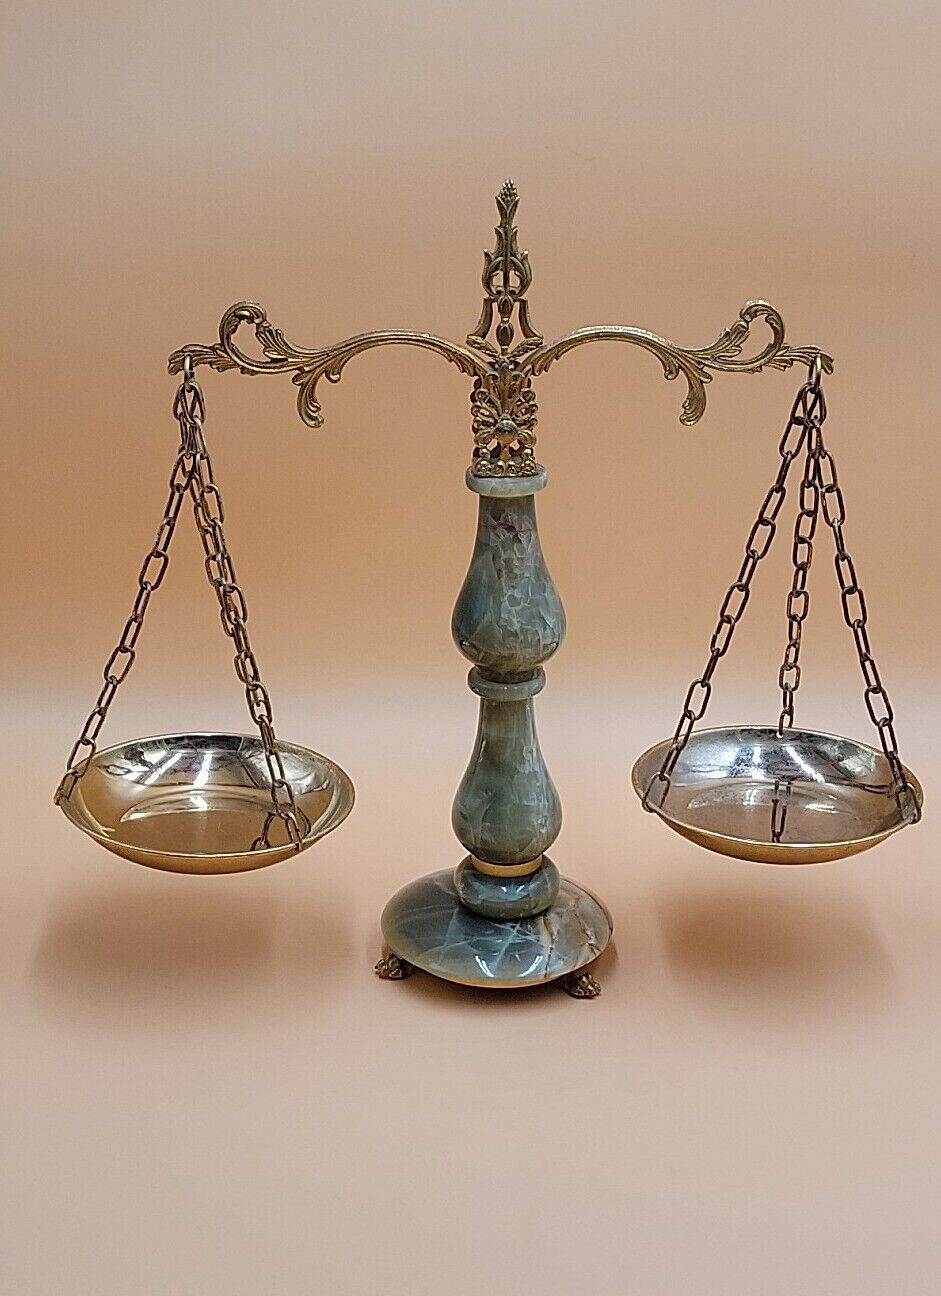 Scales Of Justice Ornamental Art Green Onyx & Brass Balance Scale